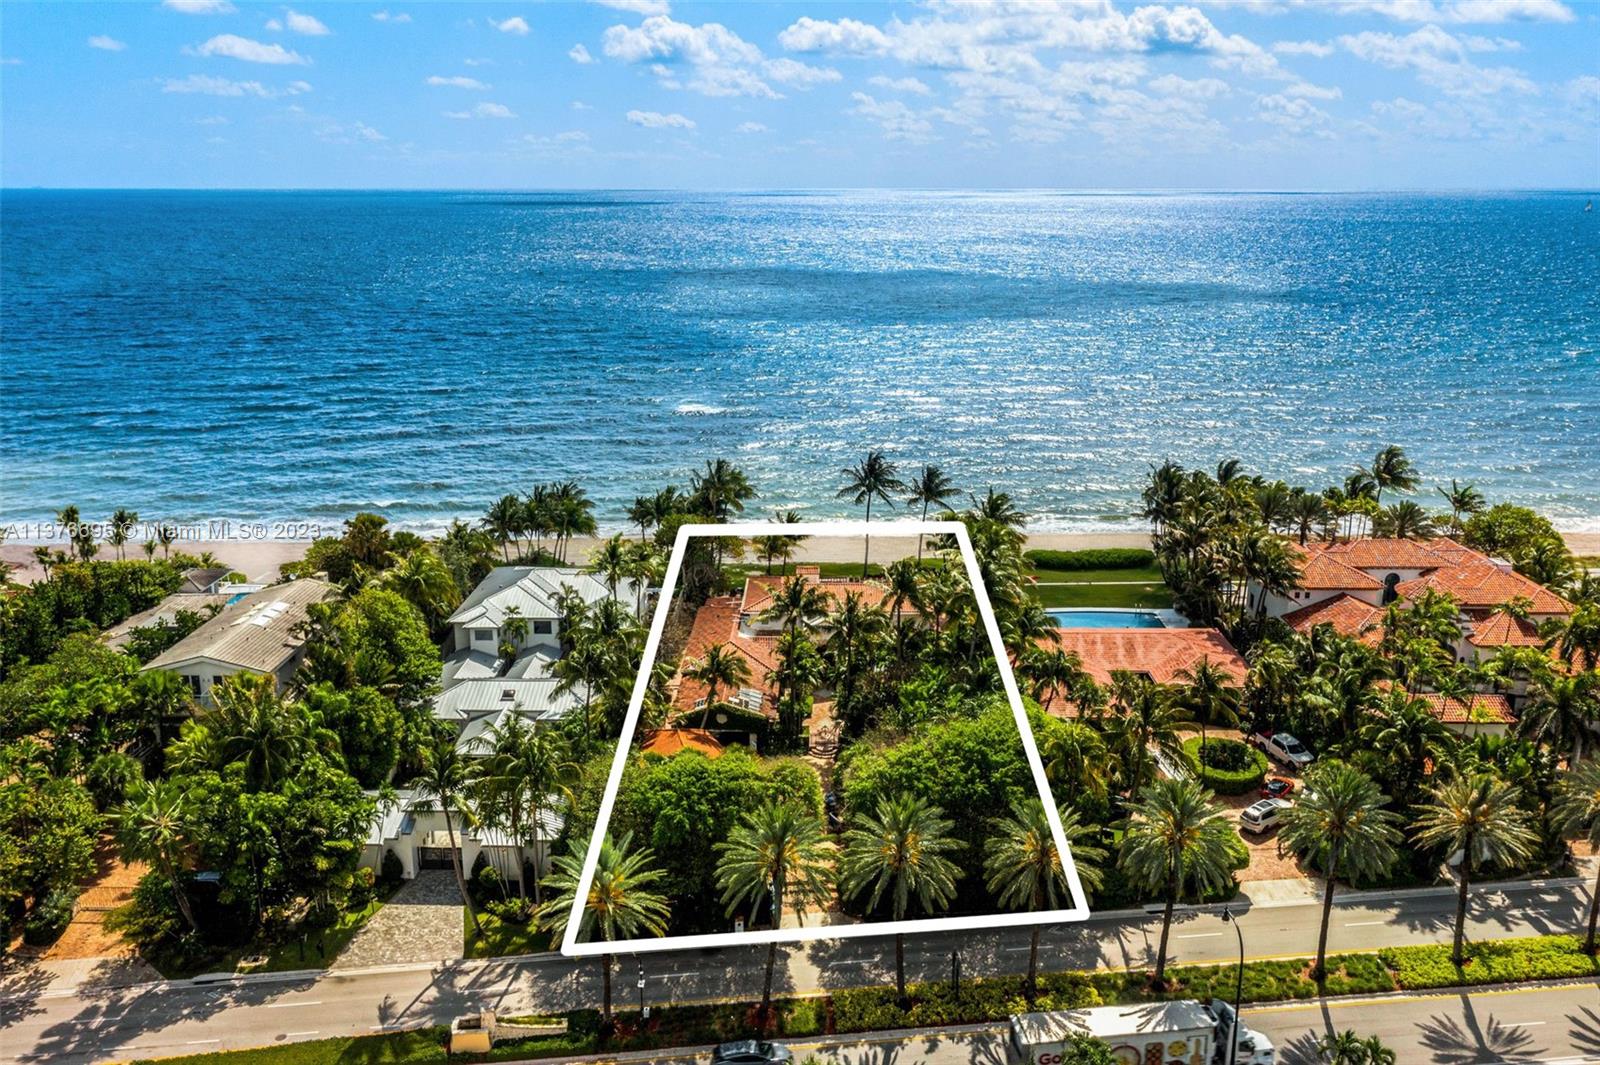 This Golden Beach property is a rare oceanfront gem boasting 31,500 SF of oceanfront land & 100’ of direct beachfront. This prime location offers panoramic ocean views & direct access to the pristine sands of the beach, making it a unique opportunity to create a custom oceanfront masterpiece. The area is known for its exclusivity, w/ some of the most luxurious homes in South Florida, providing a serene environment surrounded by lush greenery & white sand beaches. Residents can enjoy world-class dining, shopping, & entertainment. With unparalleled ocean views, this property offers the ultimate coastal living experience & is an excellent opportunity to own a piece of paradise in one of Florida's most sought-after areas w/ a private beach, clubhouse, Golden Beach police force & tennis courts.